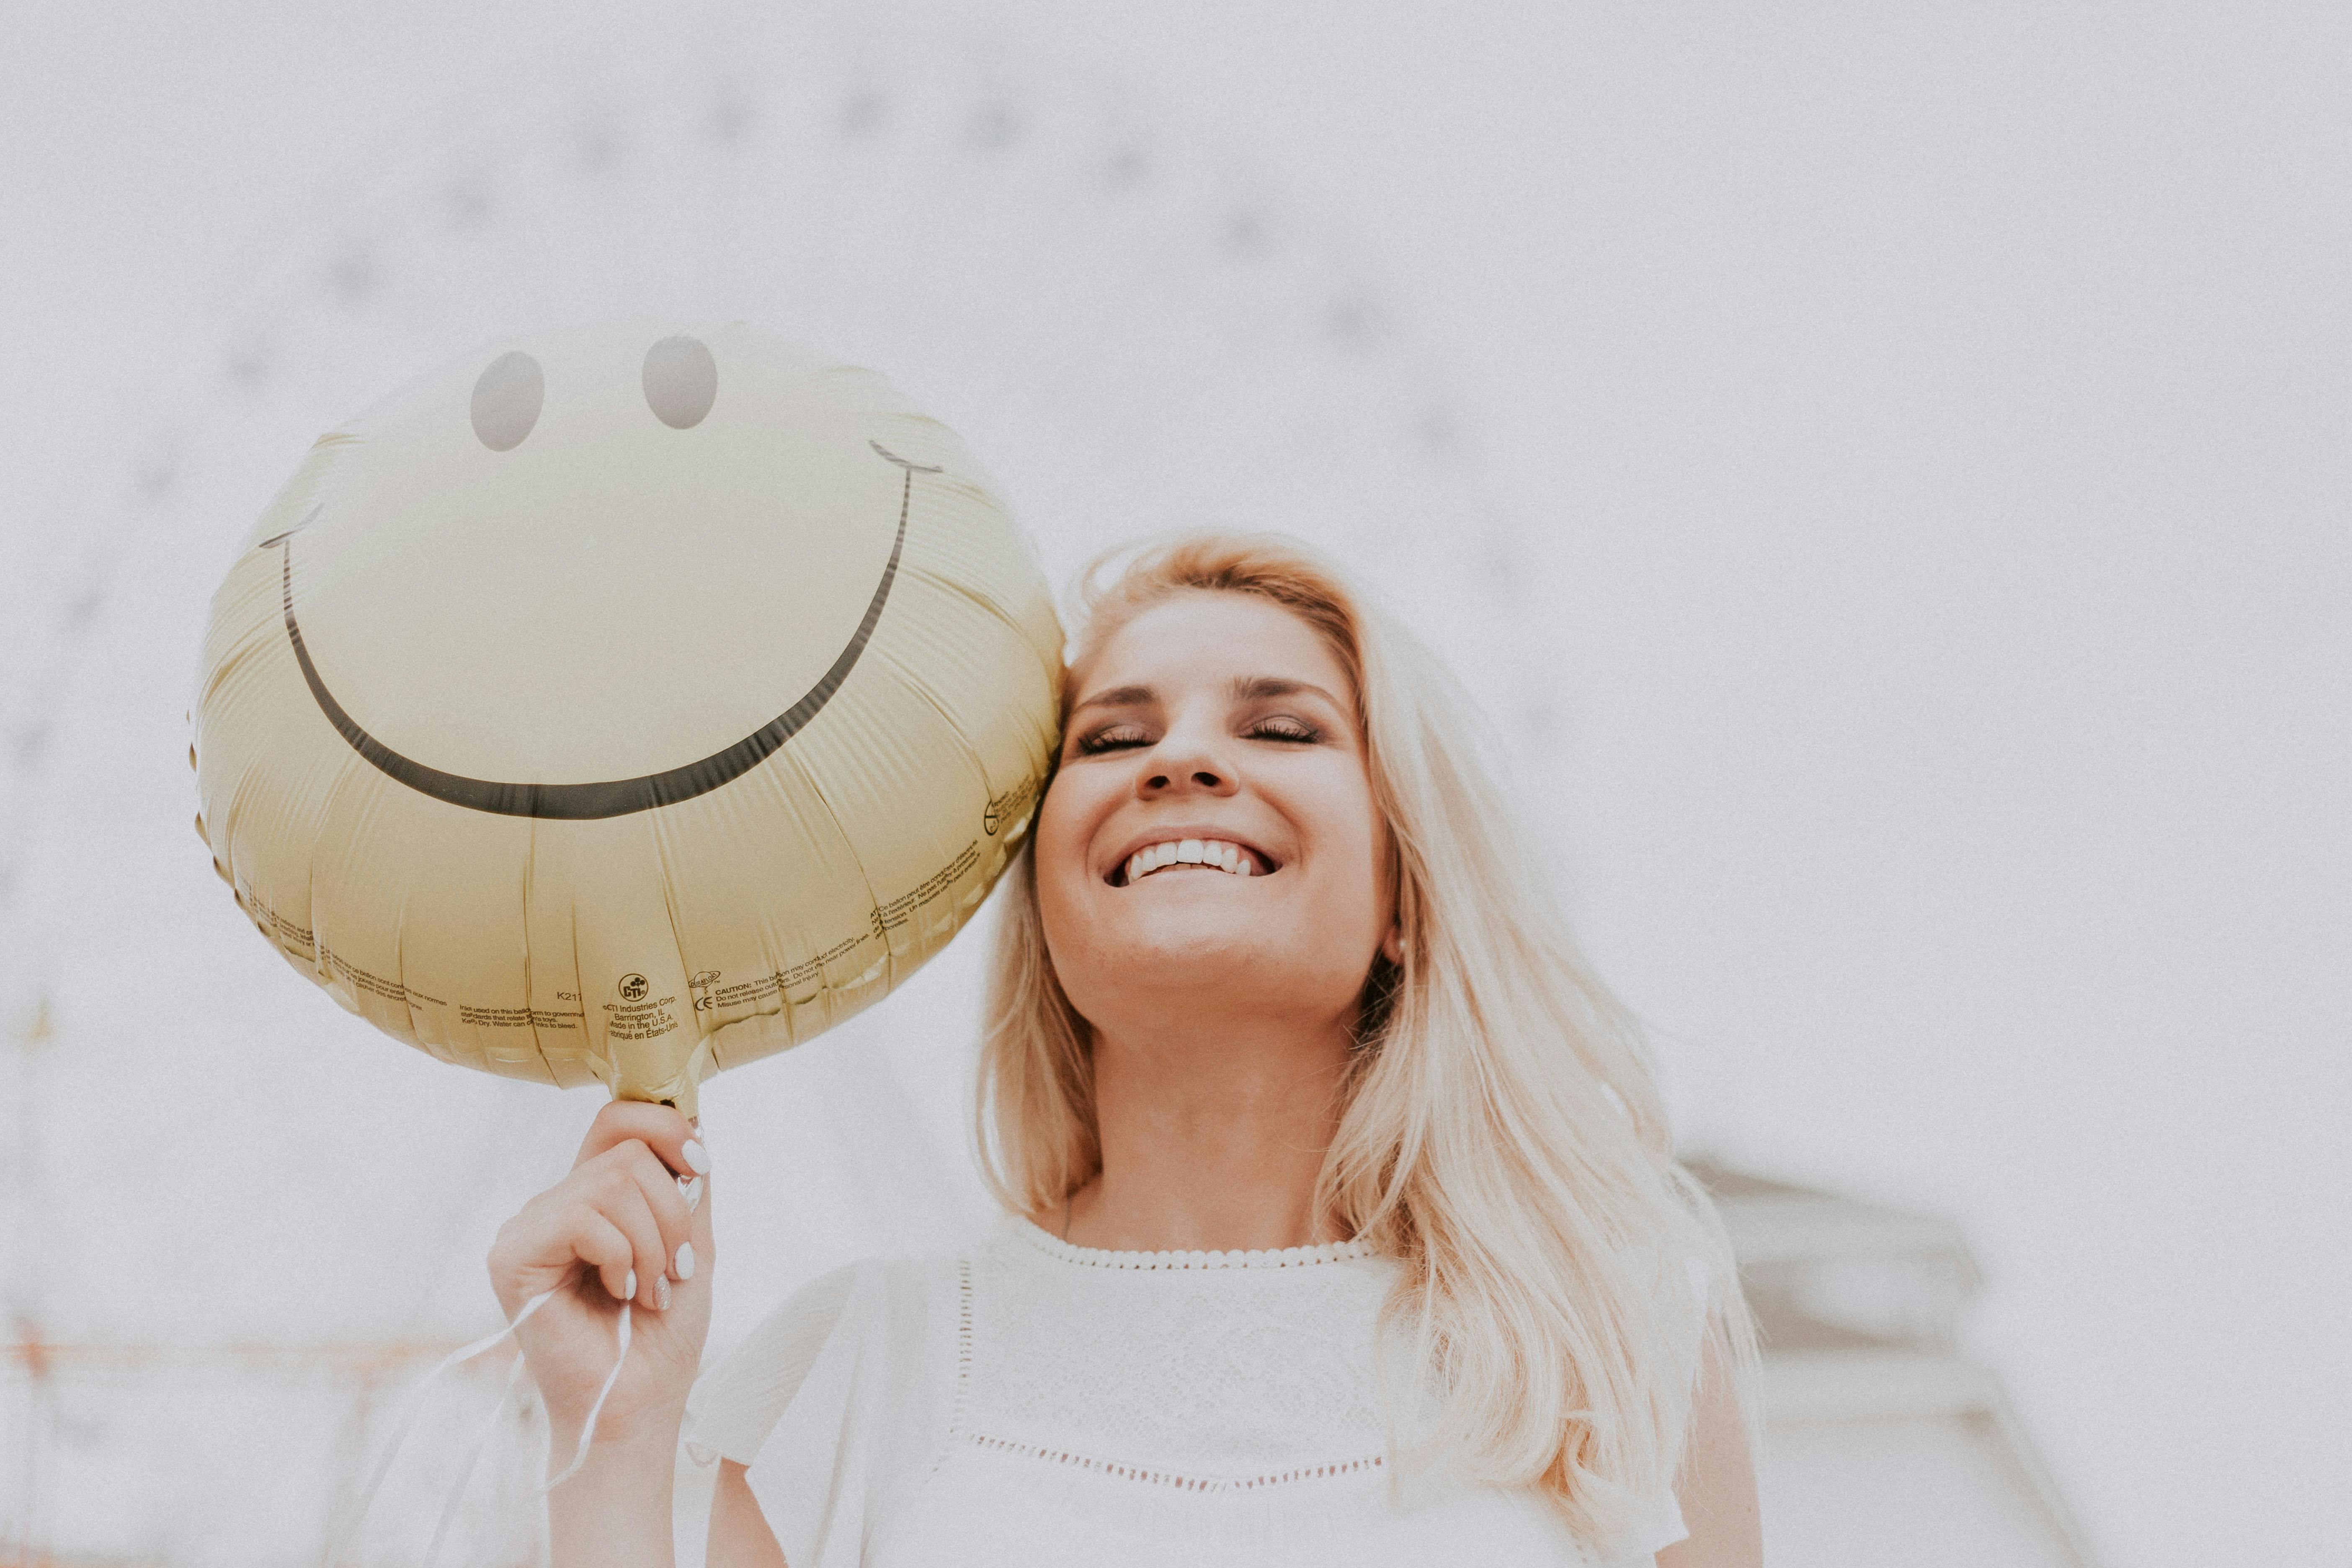 Woman holding a smiley balloon | Source: Pexels